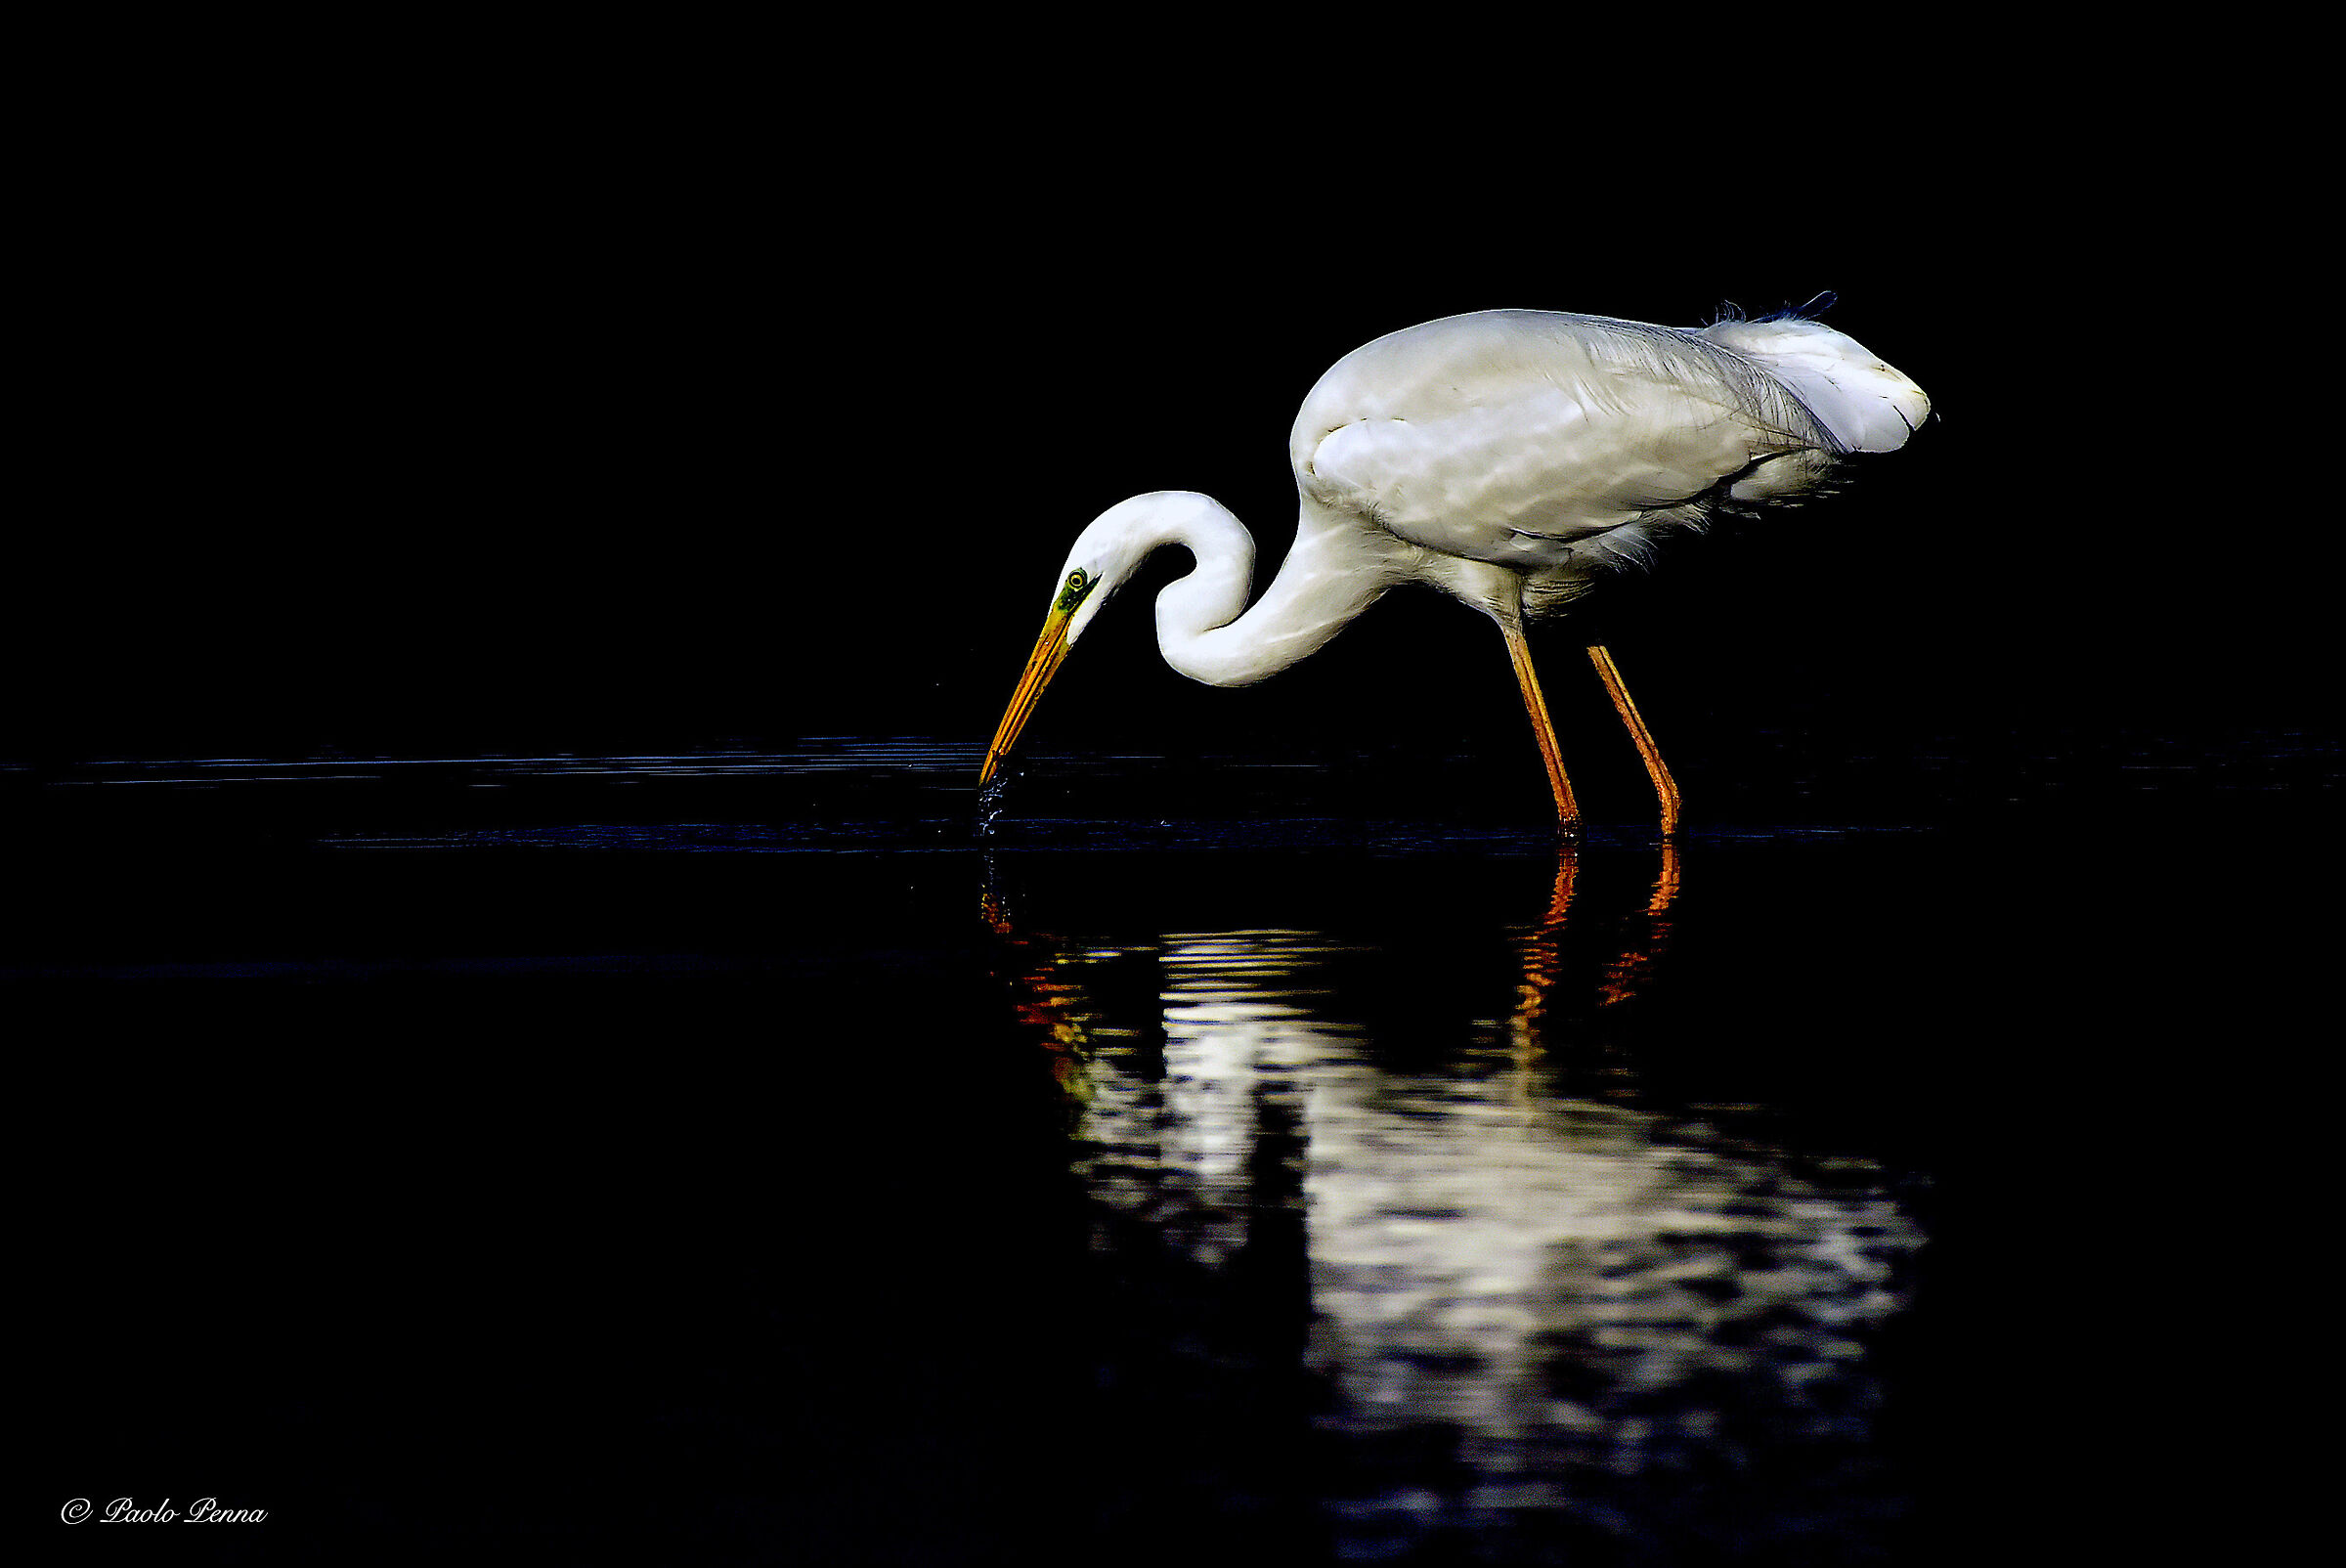 greater white heron in the hunt...